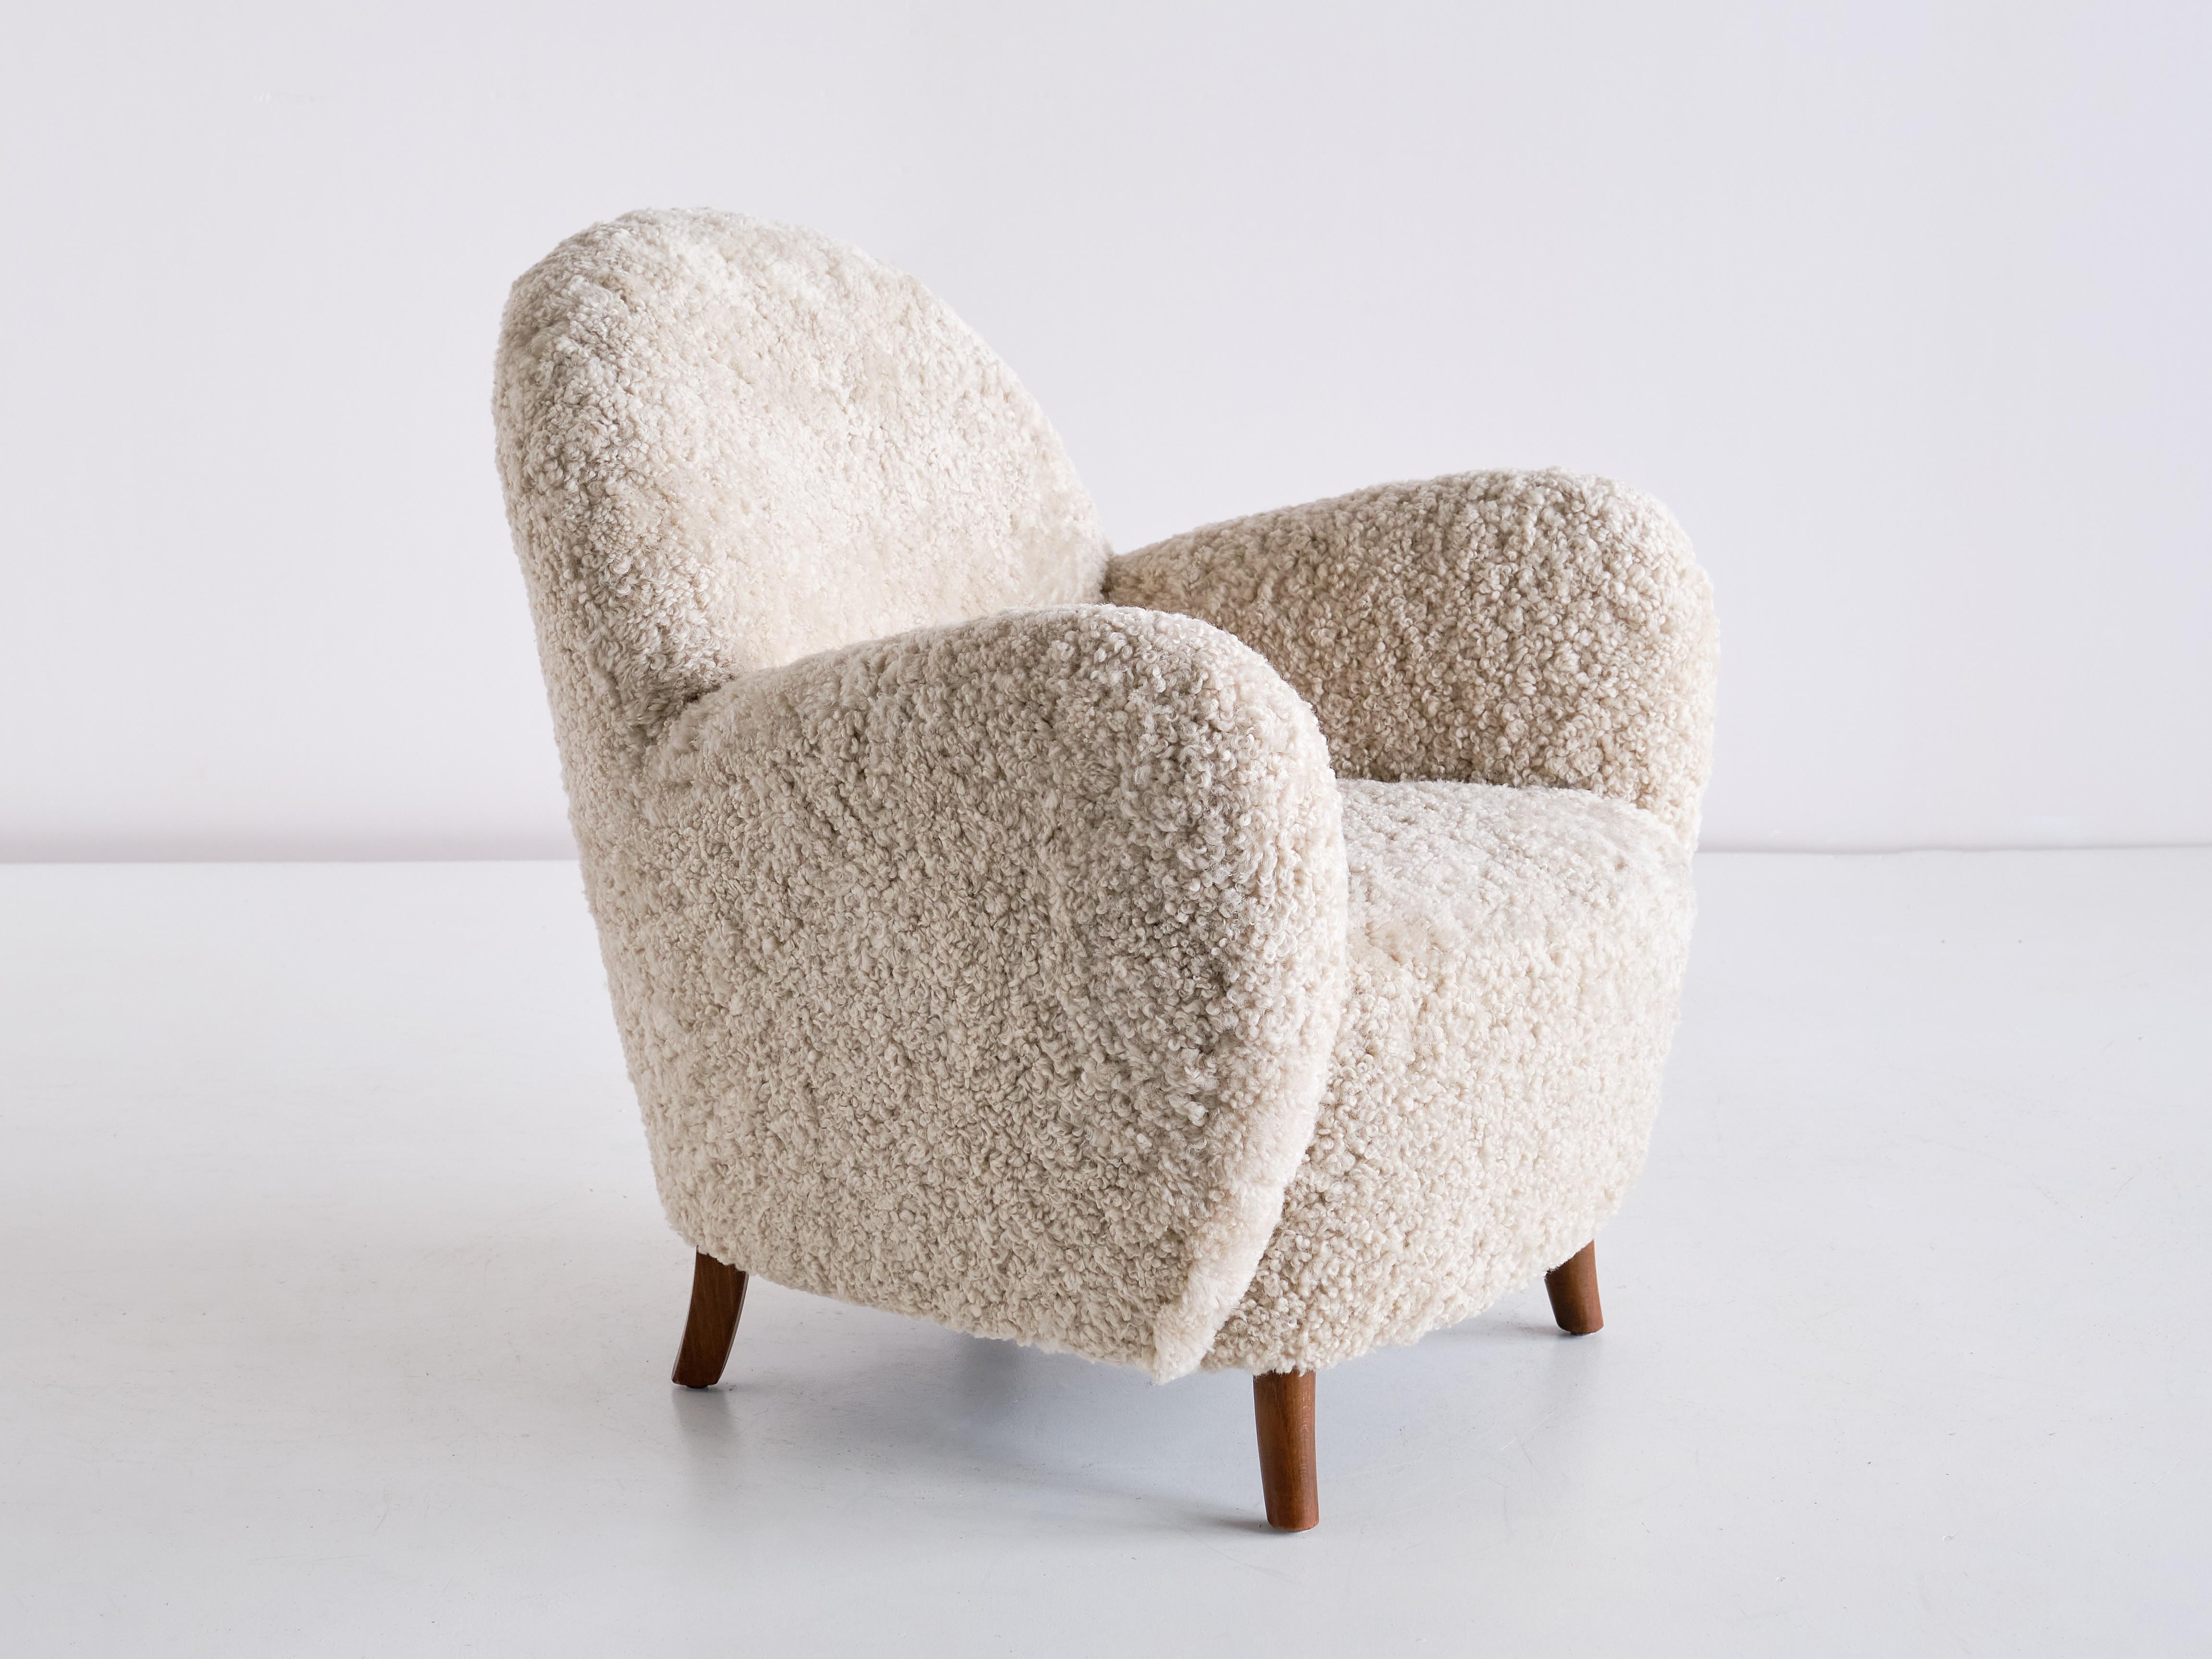 Pair of Thorald Madsen Armchairs in Sheepskin and Beech, Denmark, Mid 1930s For Sale 3